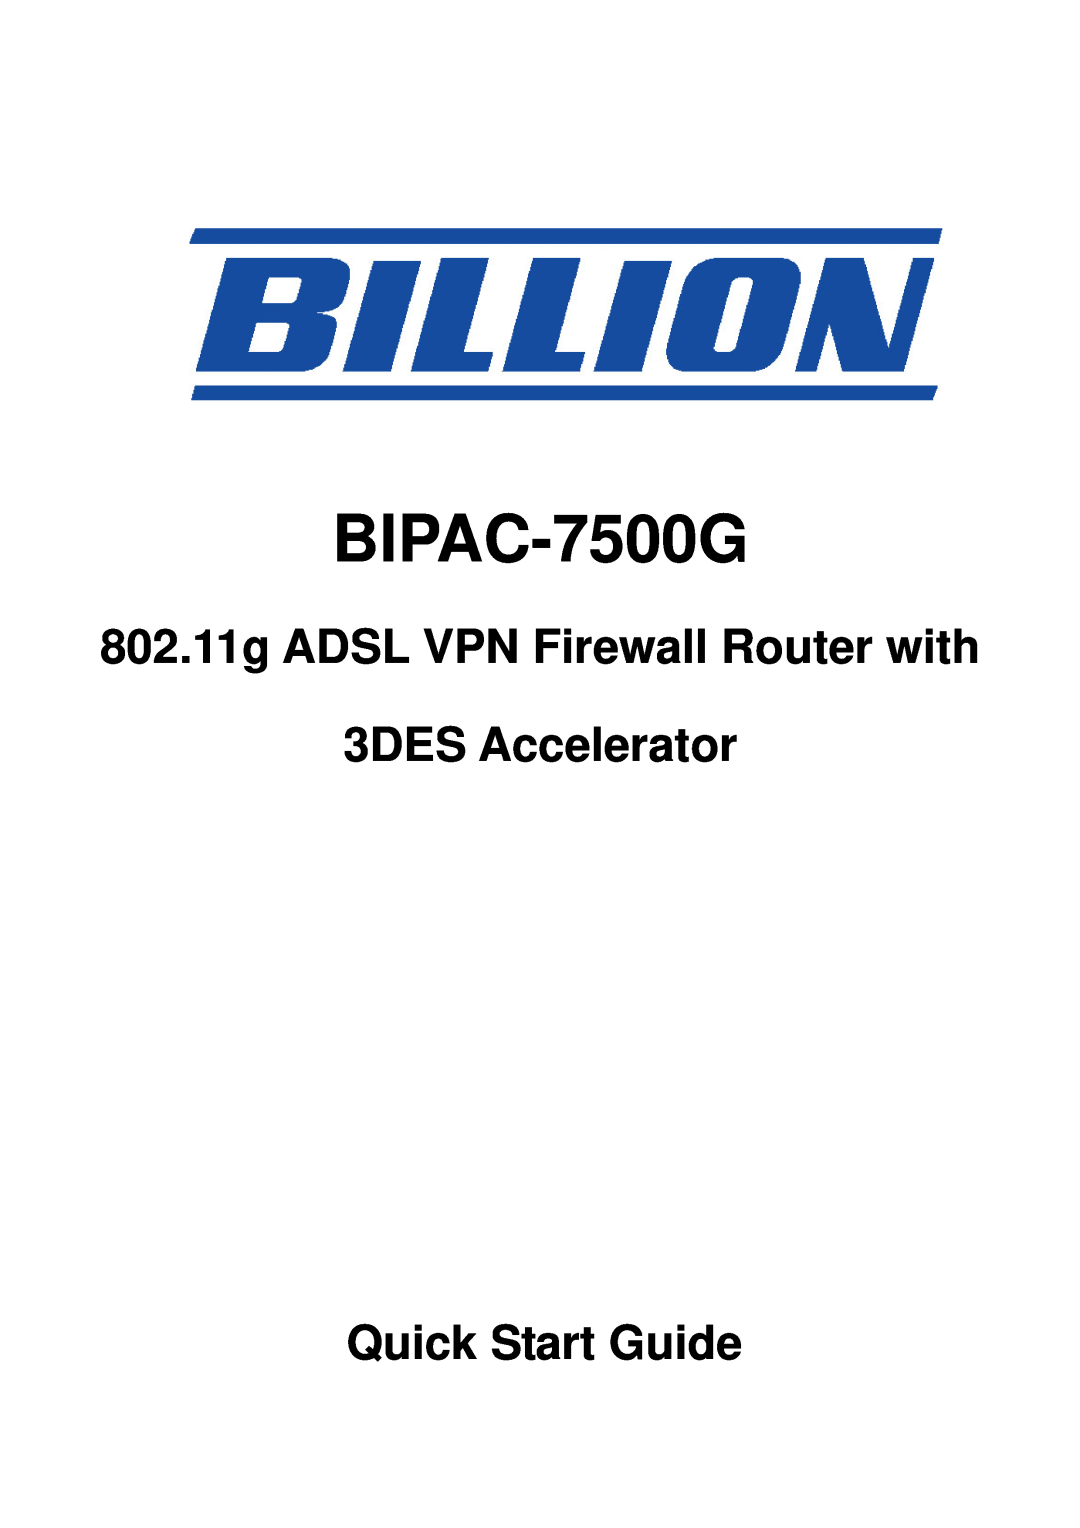 Billion Electric Company BIPAC 7500 quick start BIPAC-7500G, 802.11g ADSL VPN Firewall Router with 3DES Accelerator 